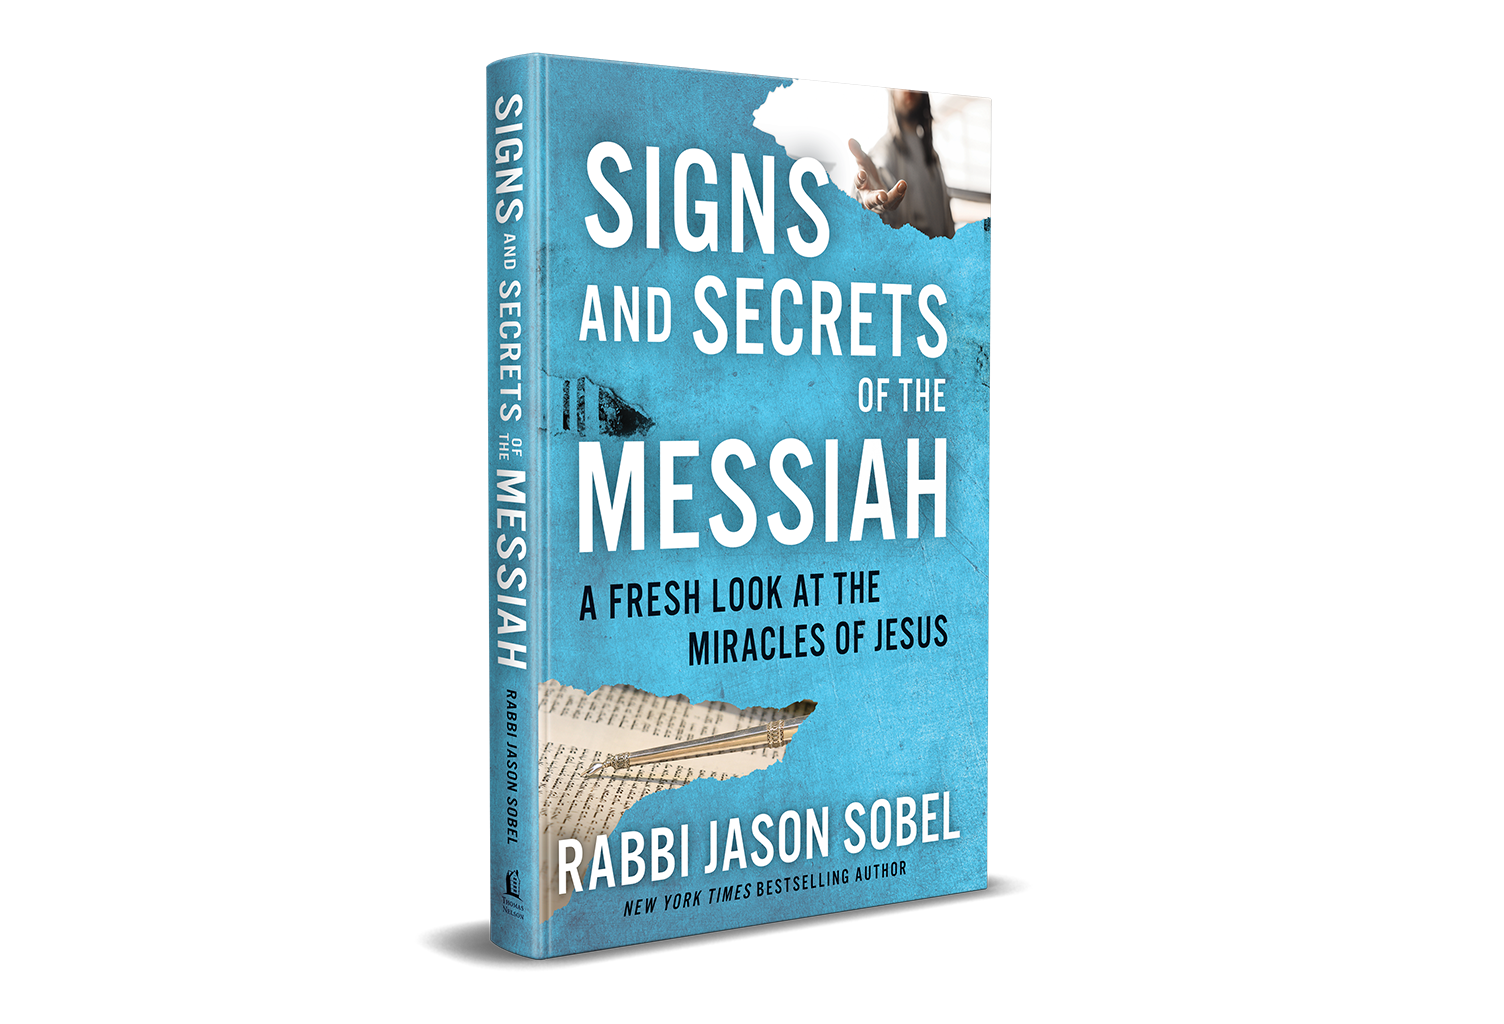 Signs and Secrets of the Messiah by Rabbi Jason Sobel from TBN